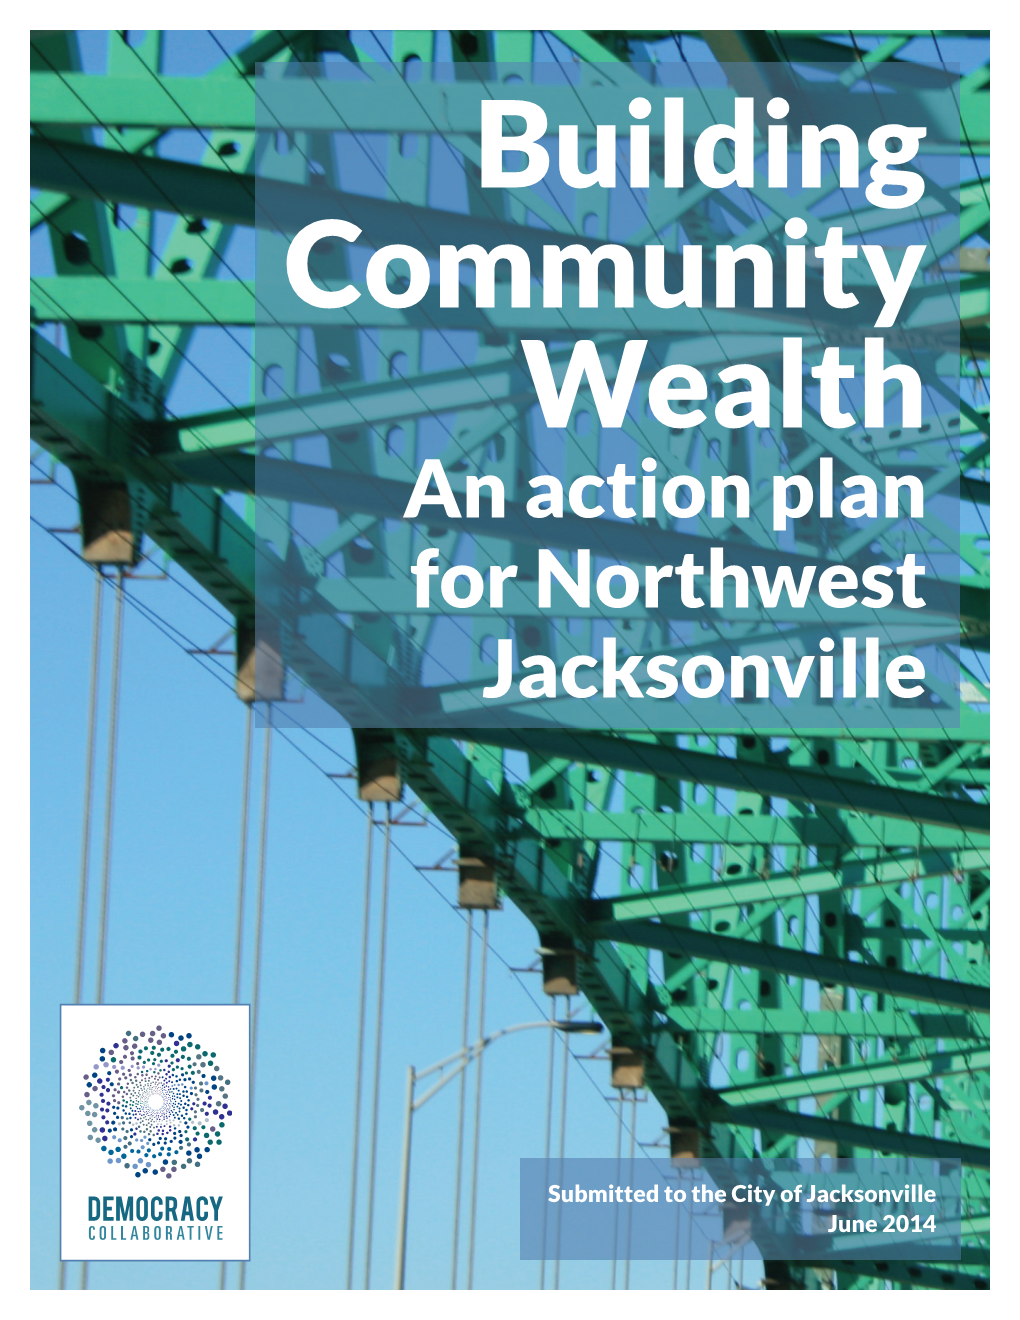 An Action Plan for Northwest Jacksonville